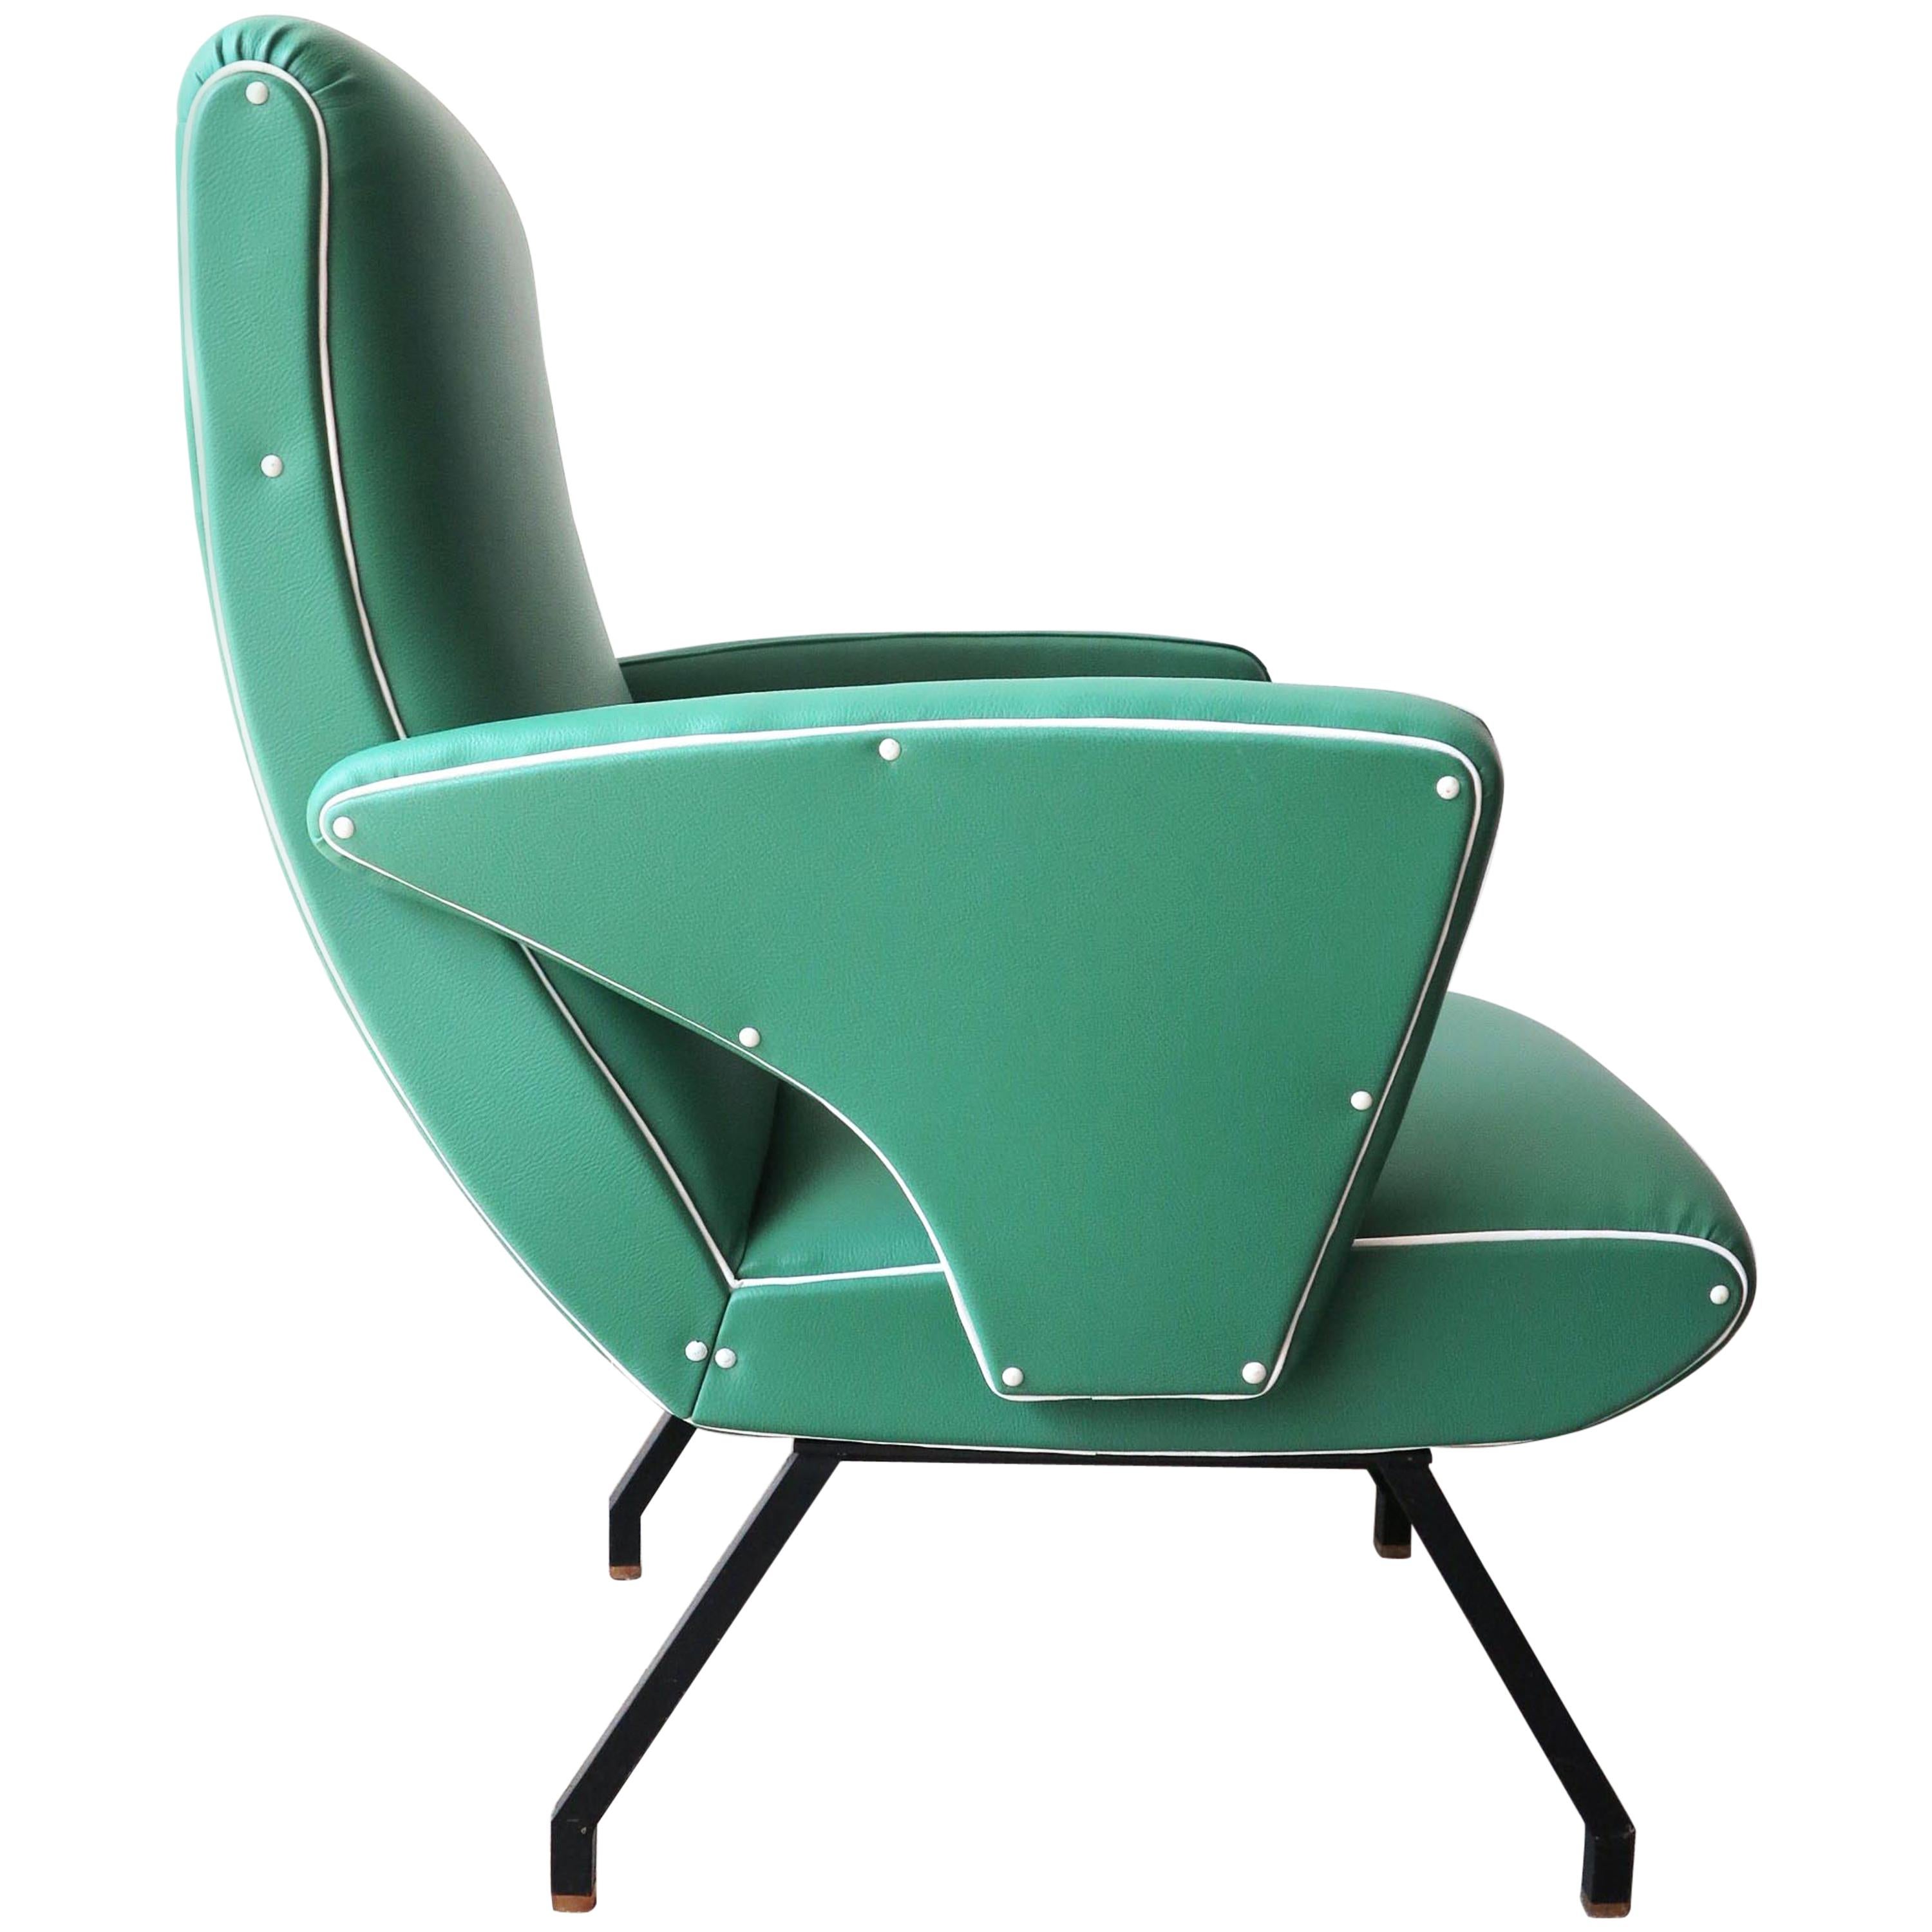 Midcentury Green Italian Armchair in the Style of "Lady Armchair", Marco Zanuso For Sale